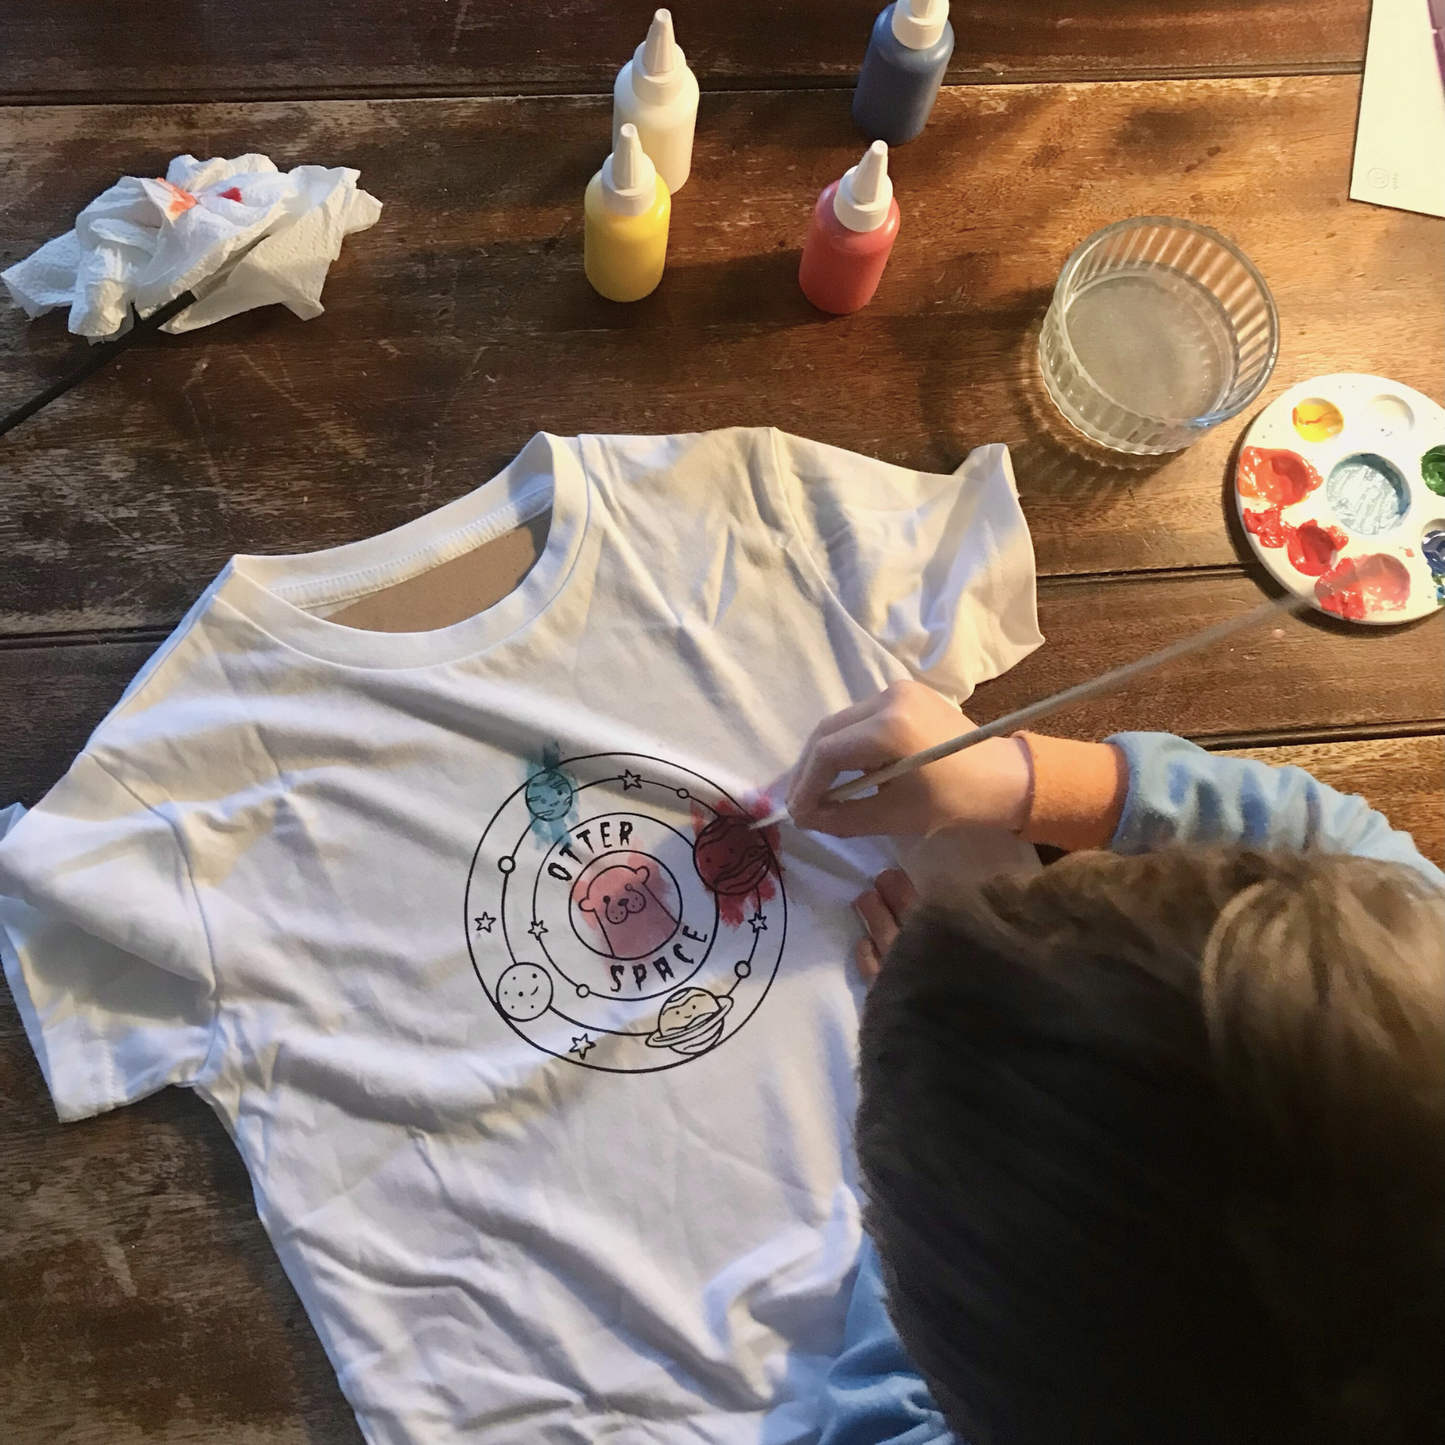 Otter Space Children's T-shirt Kit (Paint your Own)